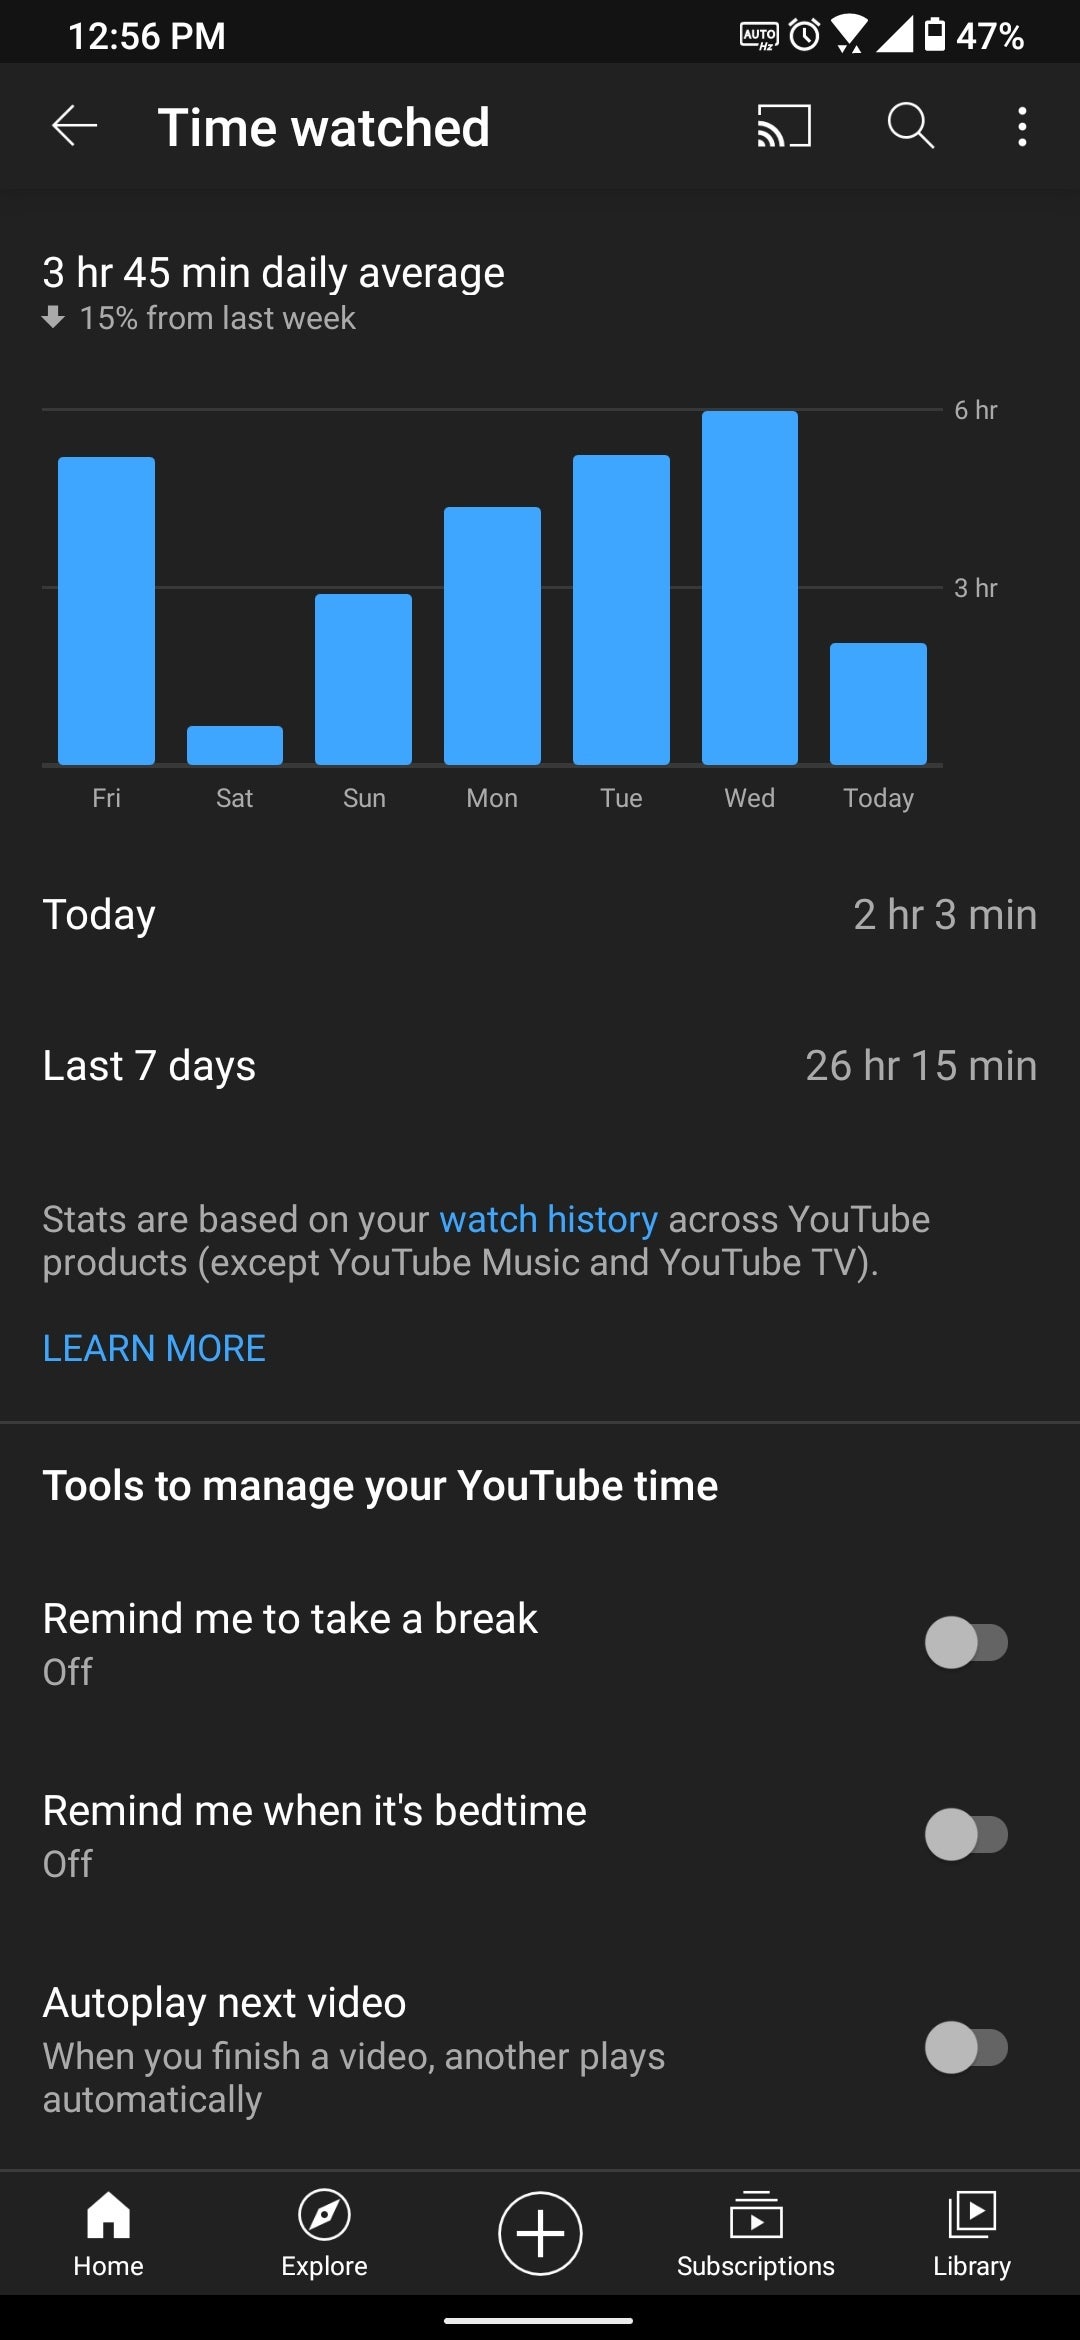 YouTube app tips and tricks (2021)